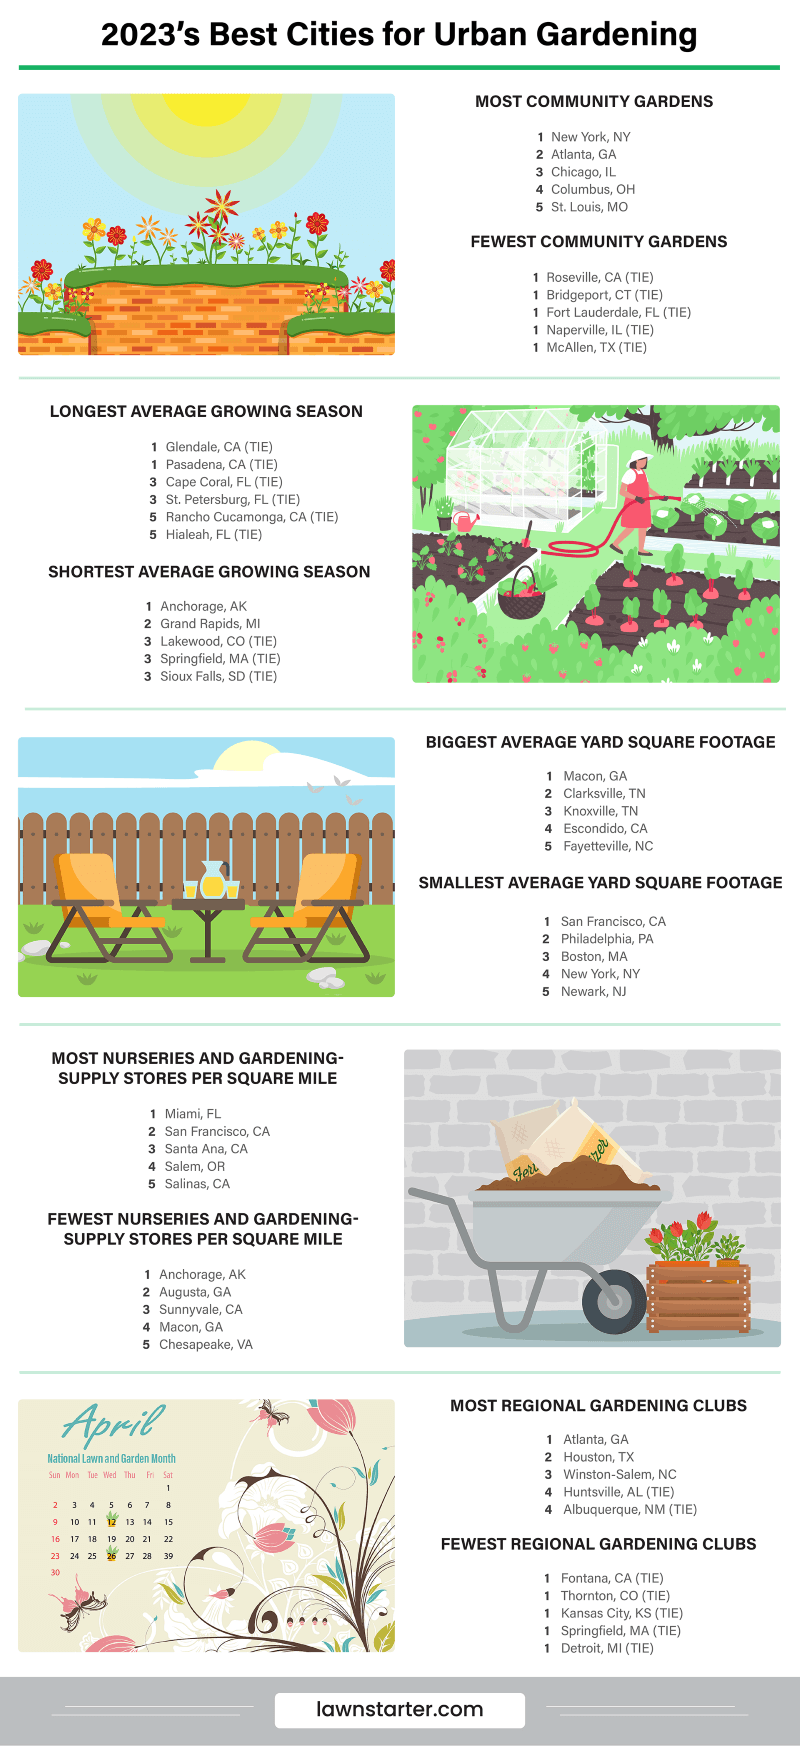 Infographic showing the Best Cities for Urban Gardening, a ranking based on access to gardening space, the length of the growing season, gardening clubs, and more